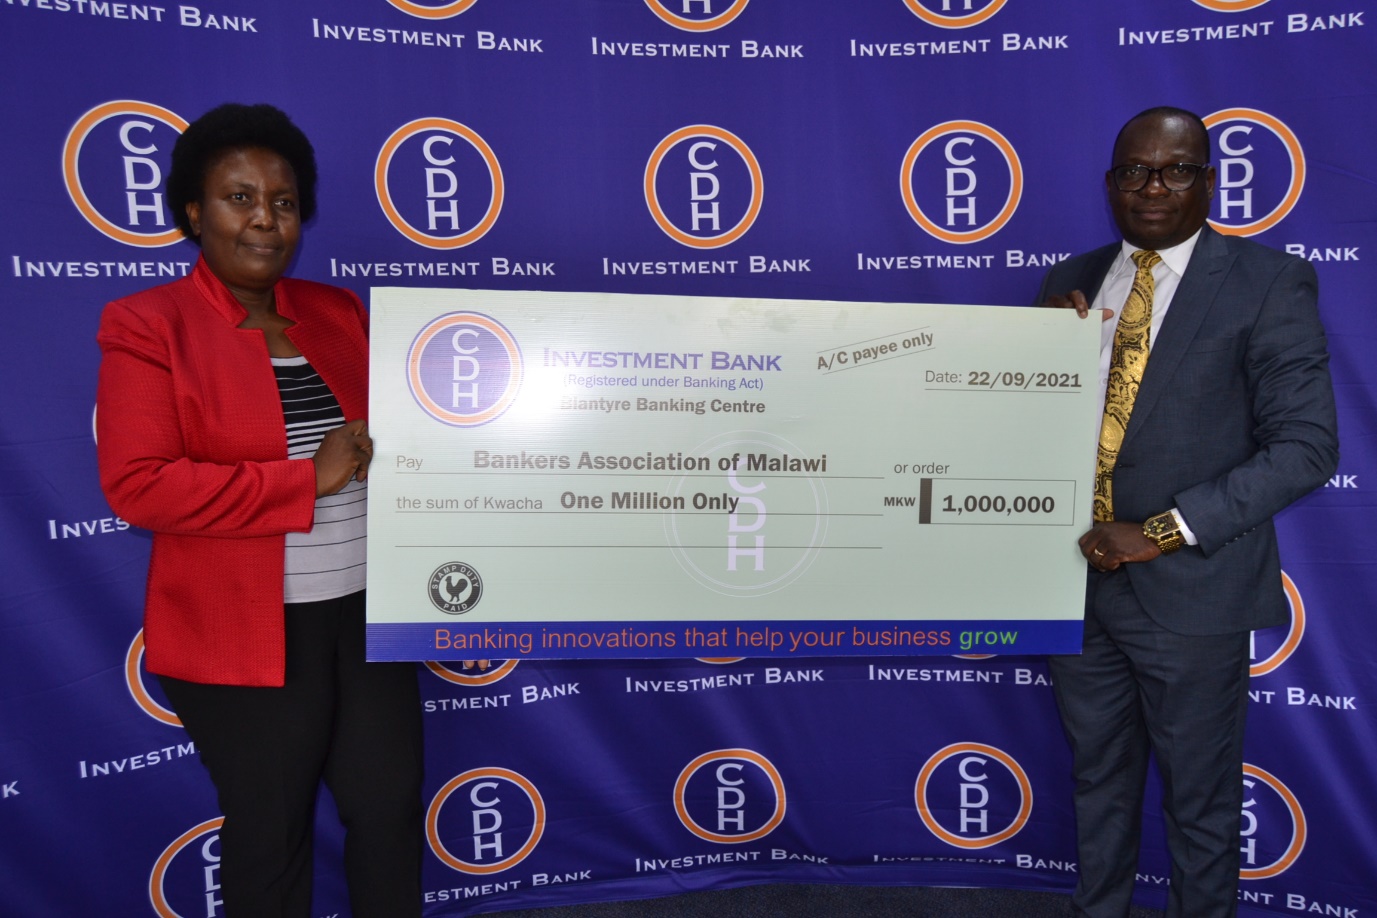 Mr Benison Jambo, Chief Business Development Officer of CDH Investment Bank hands over a cheque to Mrs Lyness Nkungula, Chief Executive Officer of the Bankers Association of Malawi